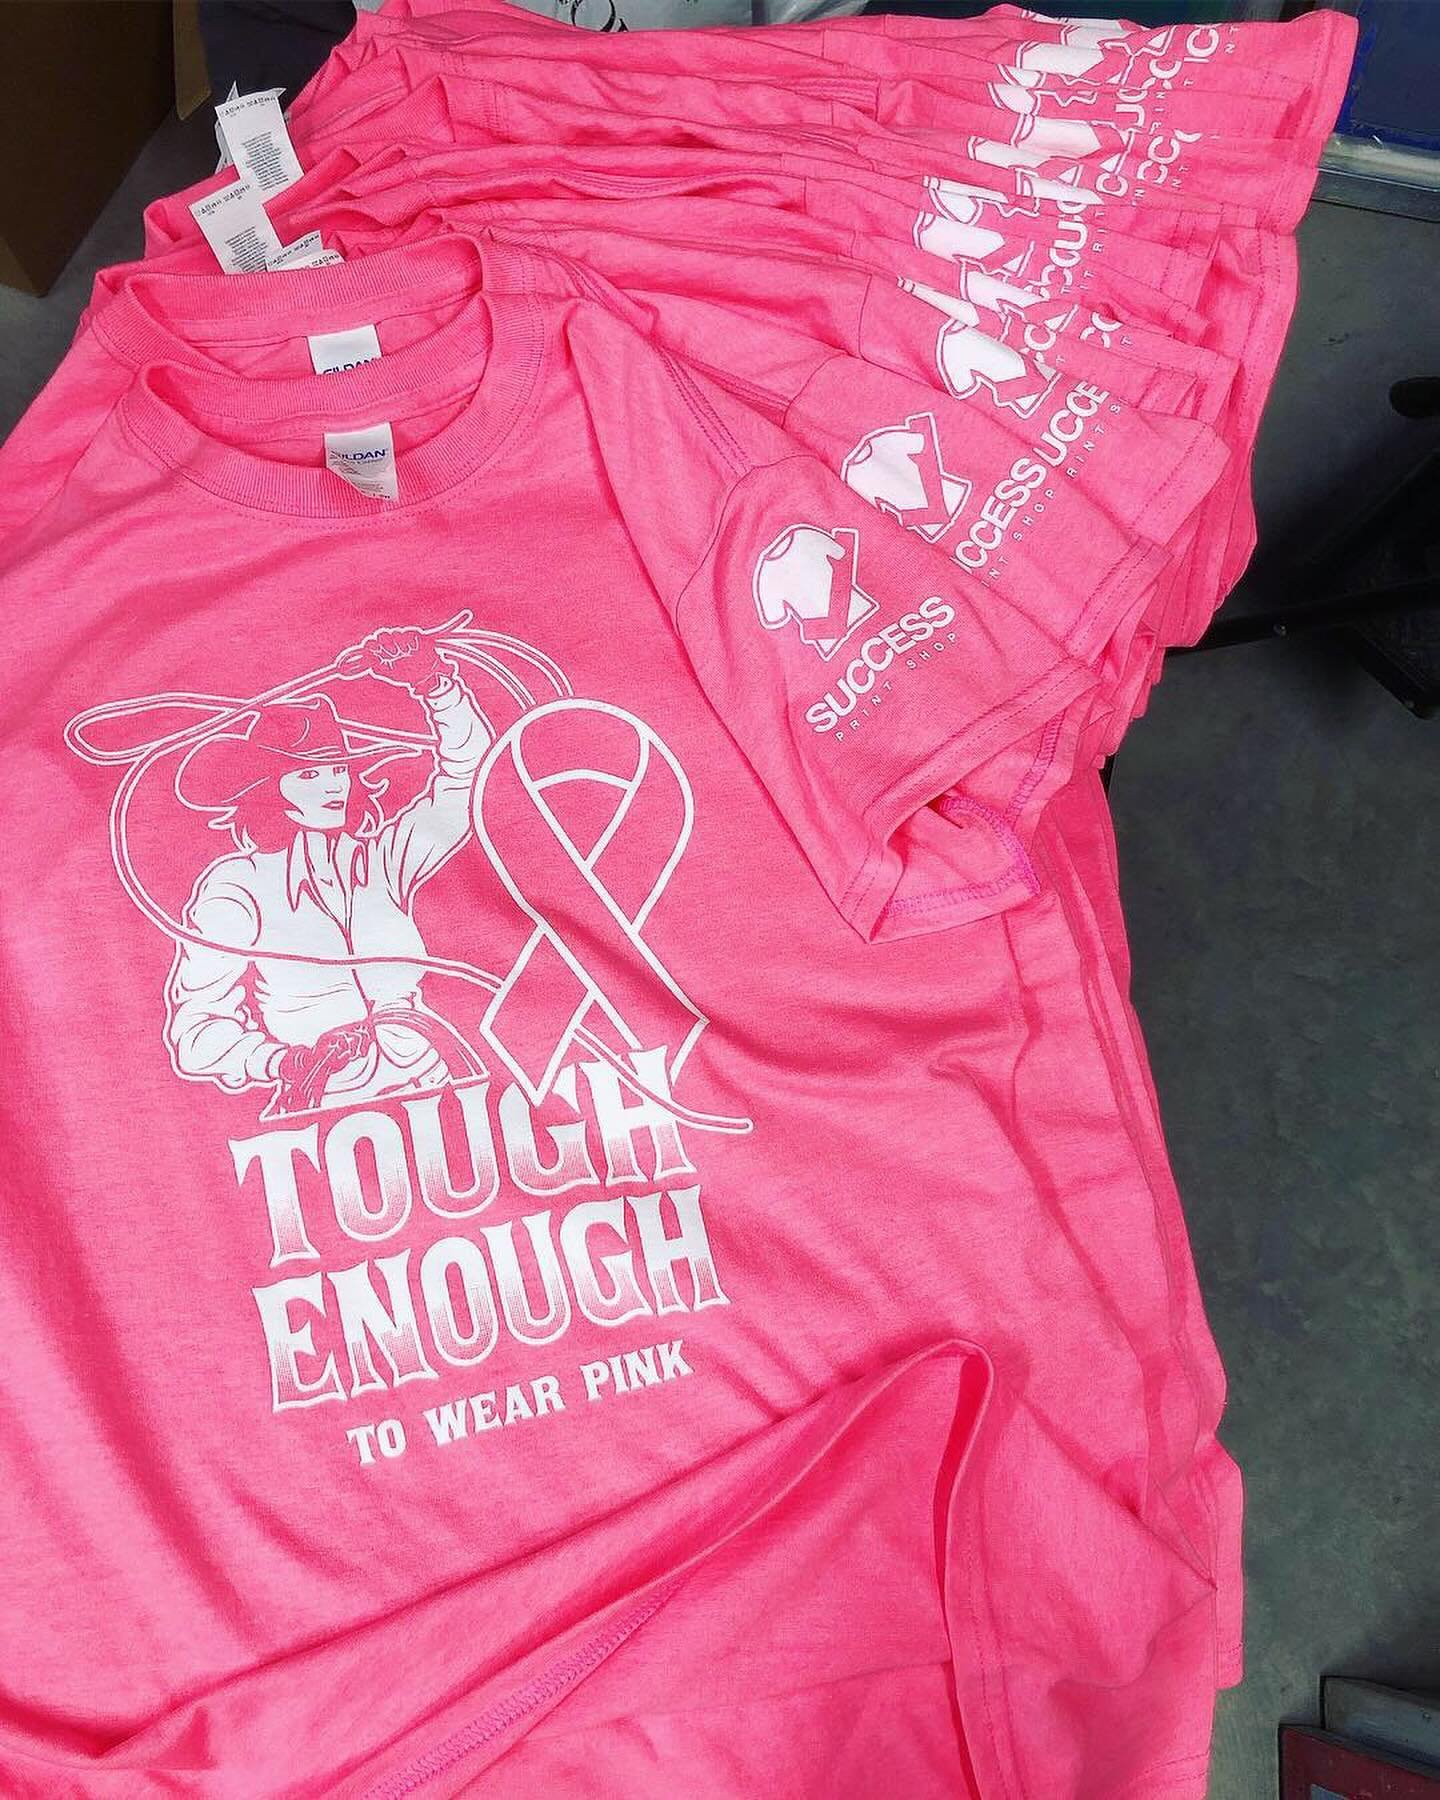 💕𝐑𝐎𝐃𝐄𝐎 𝐒𝐙𝐍💕 tomorrow is Pink Night at the San Angelo Stock-show and #Rodeo